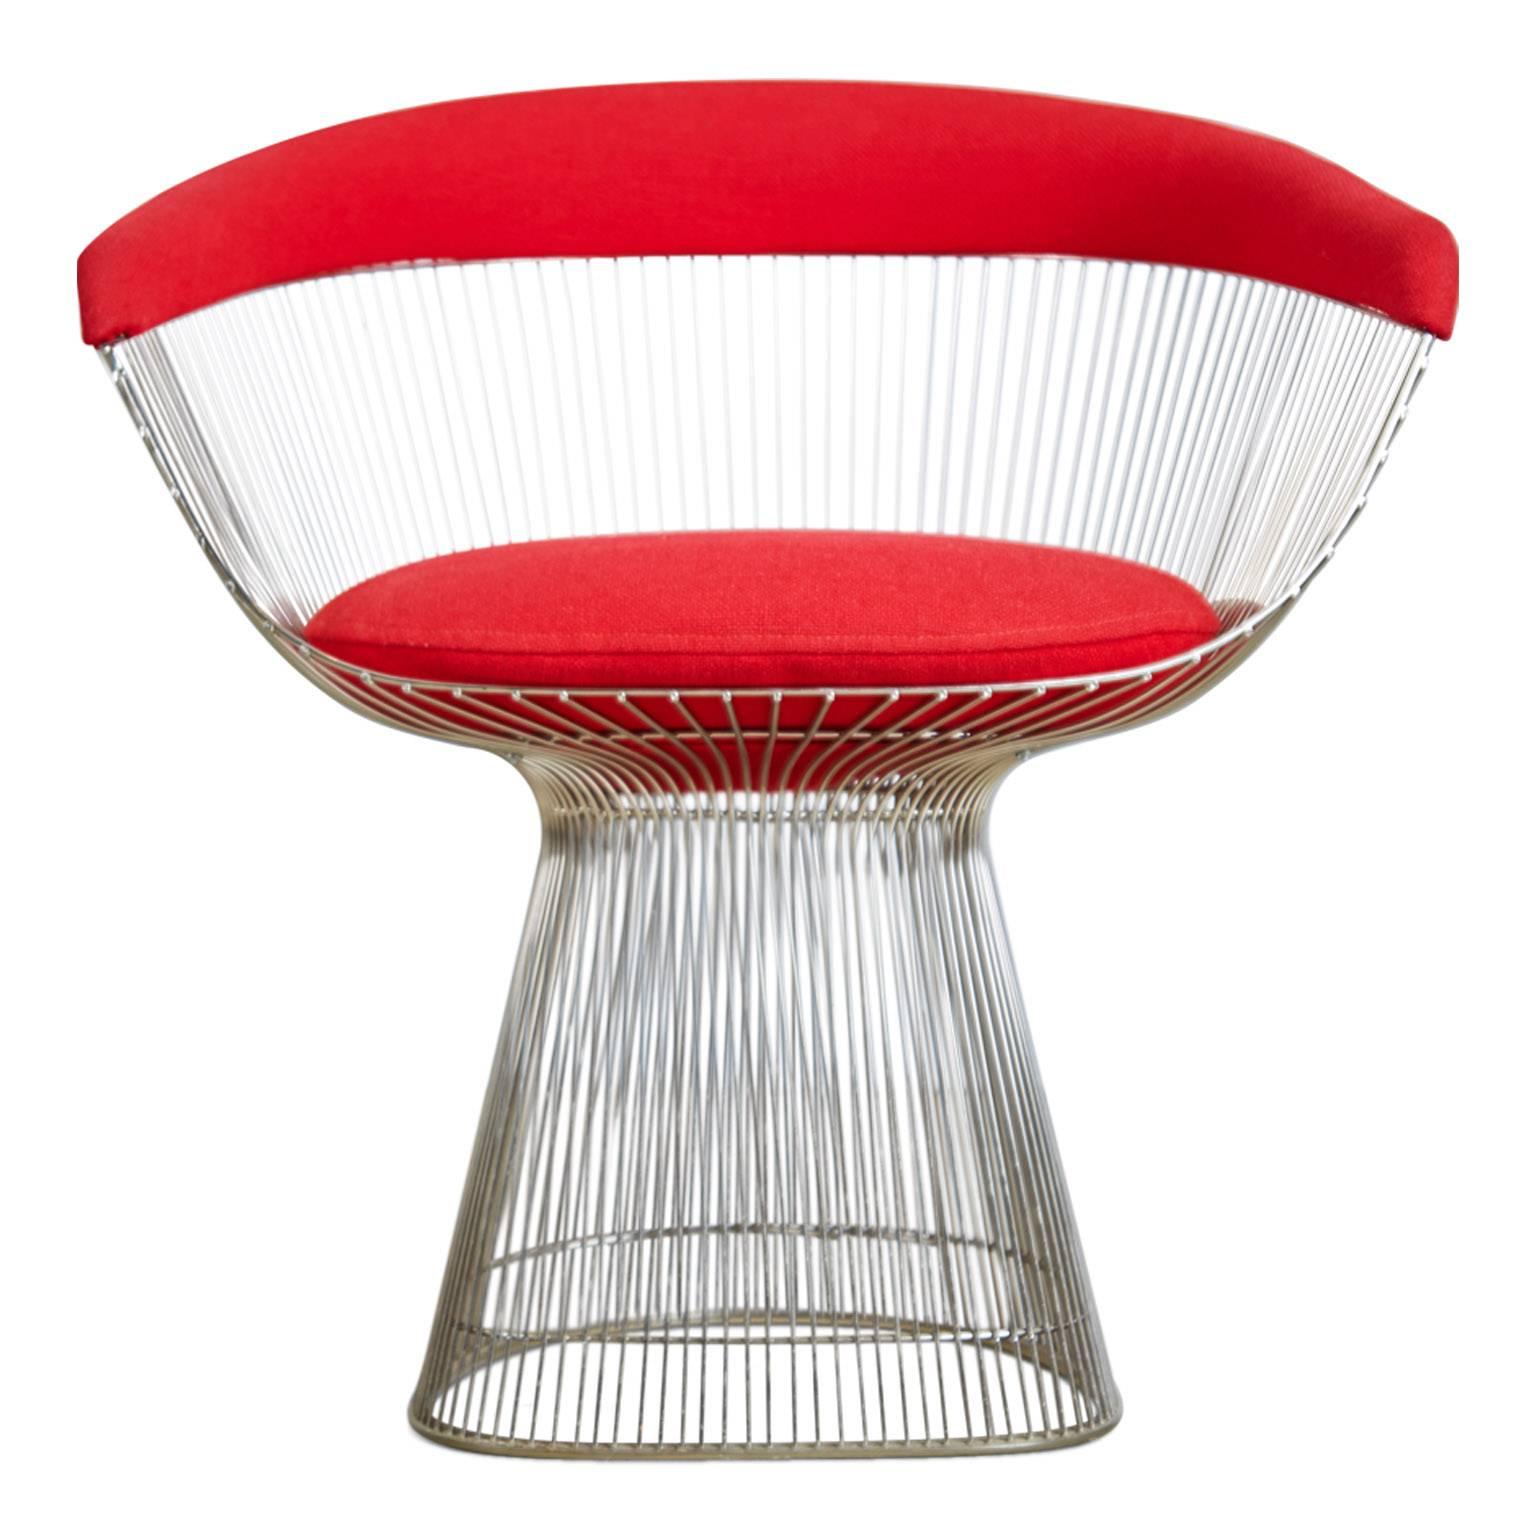 The wire collection created by Platner for Knoll in 1966, remains one of the most relevant Mid-Century collections to date. The iconic and graceful silhouette of these Warren Platner chair's reflect the works of historical design movements,